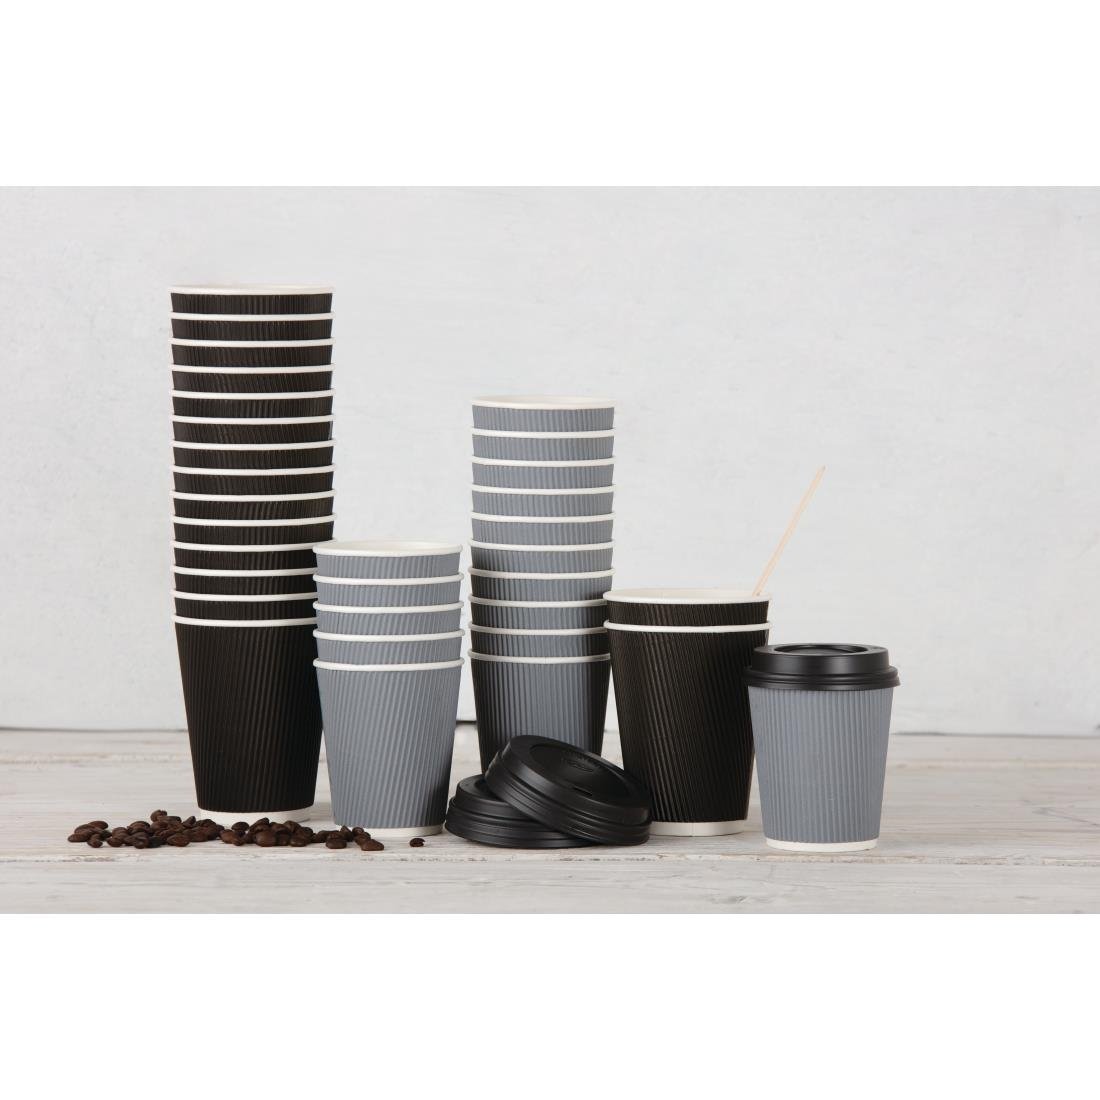 Fiesta Disposable Coffee Cups Ripple Wall Charcoal 340ml / 12oz (Pack of 500) JD Catering Equipment Solutions Ltd